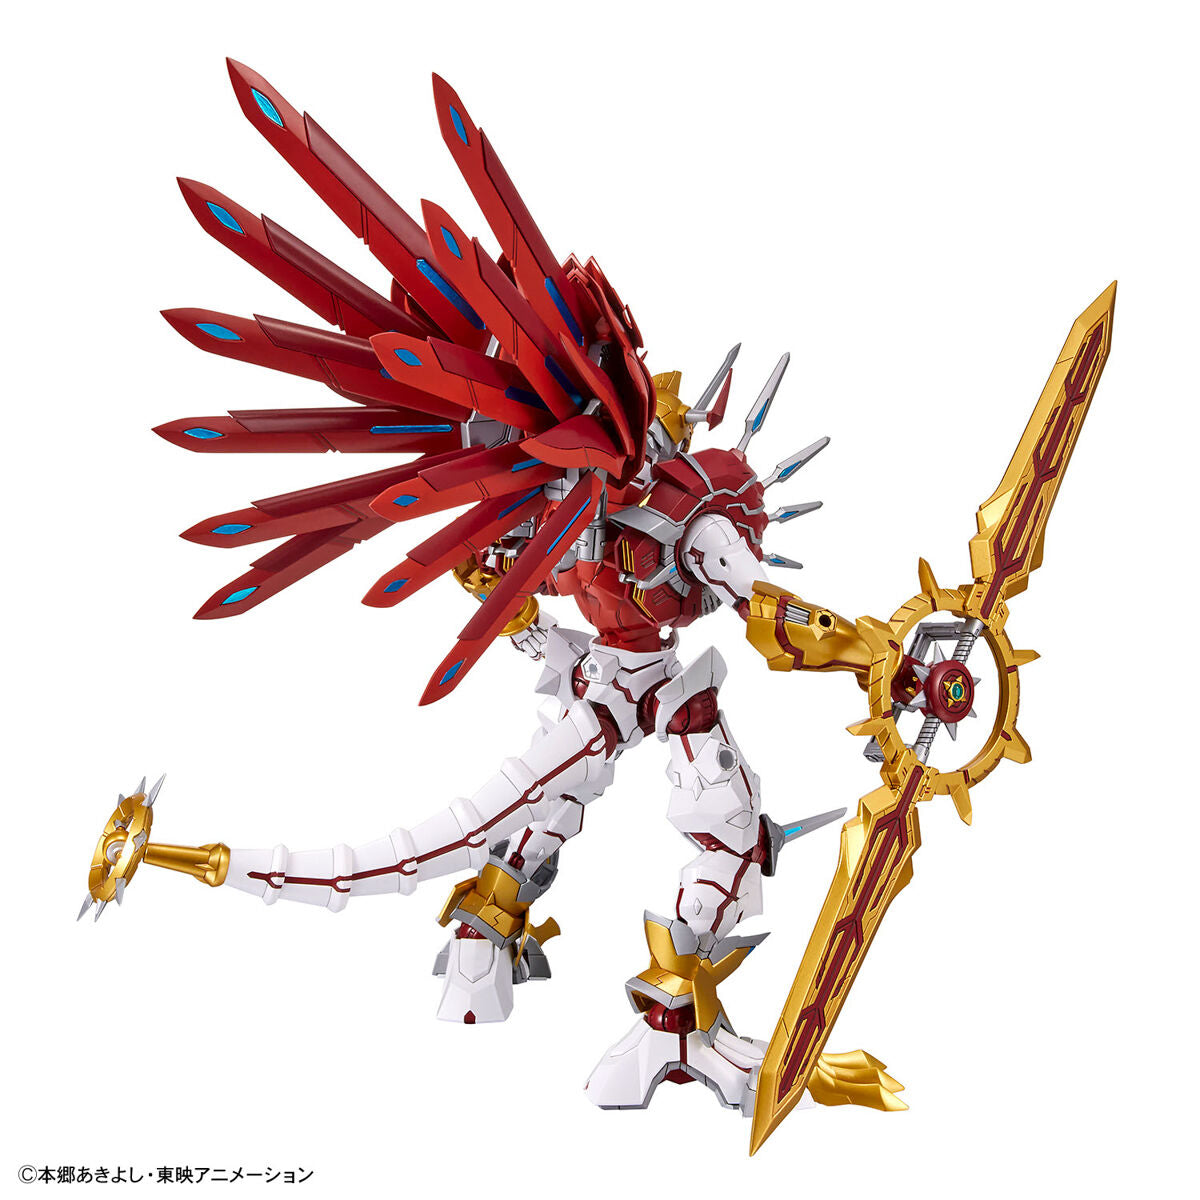 Digimon - Shinegreymon - Figure-rise Standard Amplified Model Kit, Light Dragon-type Digimon "ShineGreymon" with GeoGrey Sword, joint parts, seals, and lead wire accessories, from Bandai - Nippon Figures